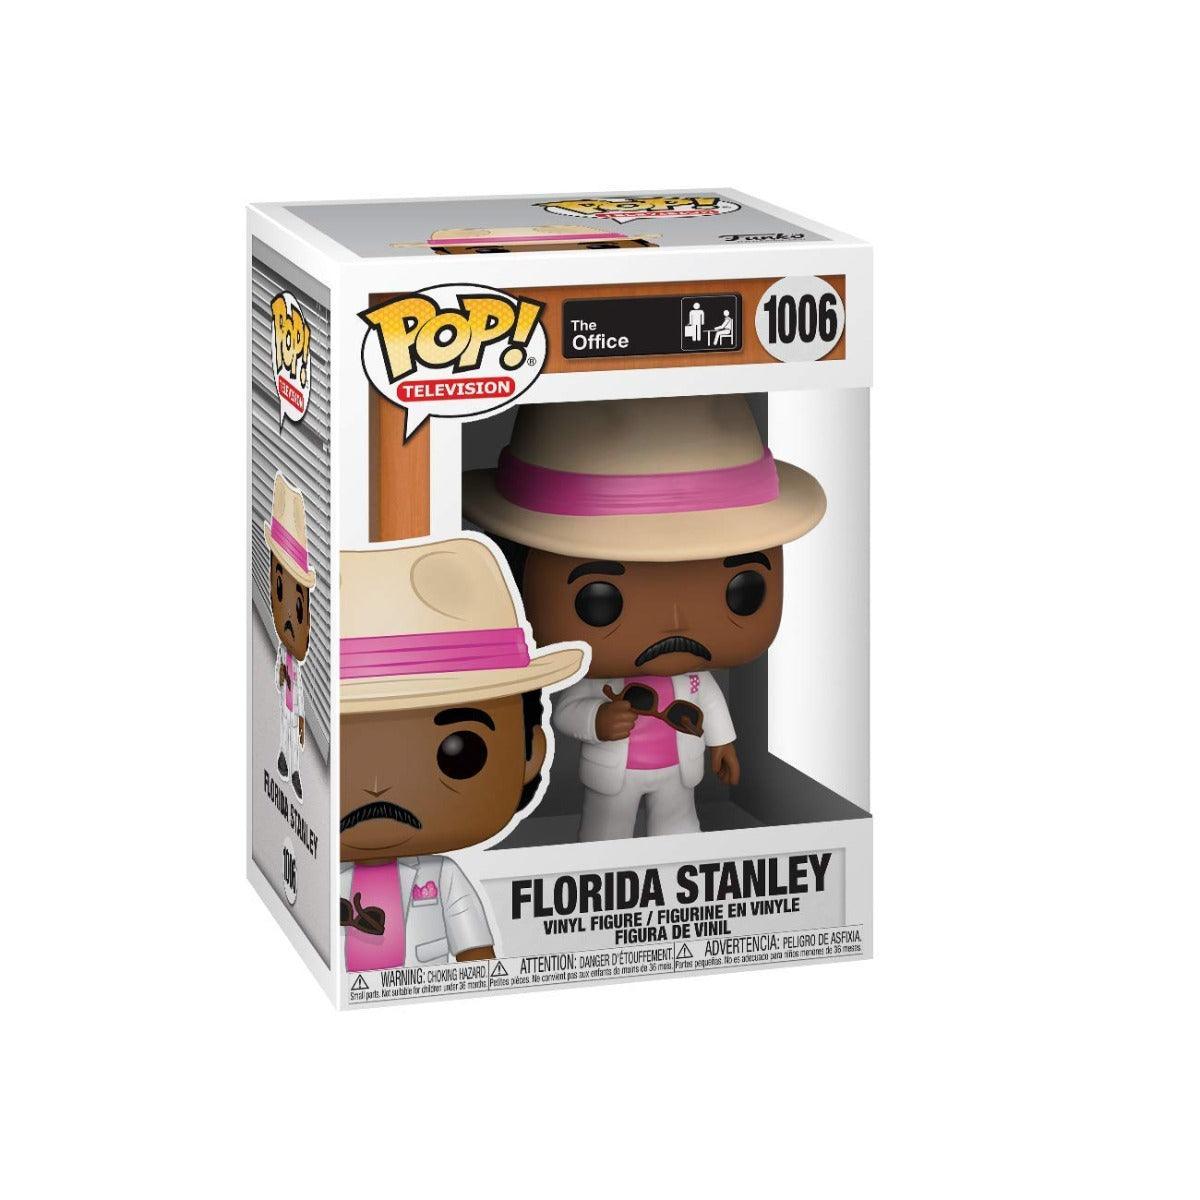 Funko Pop The Office - Florida Stanley